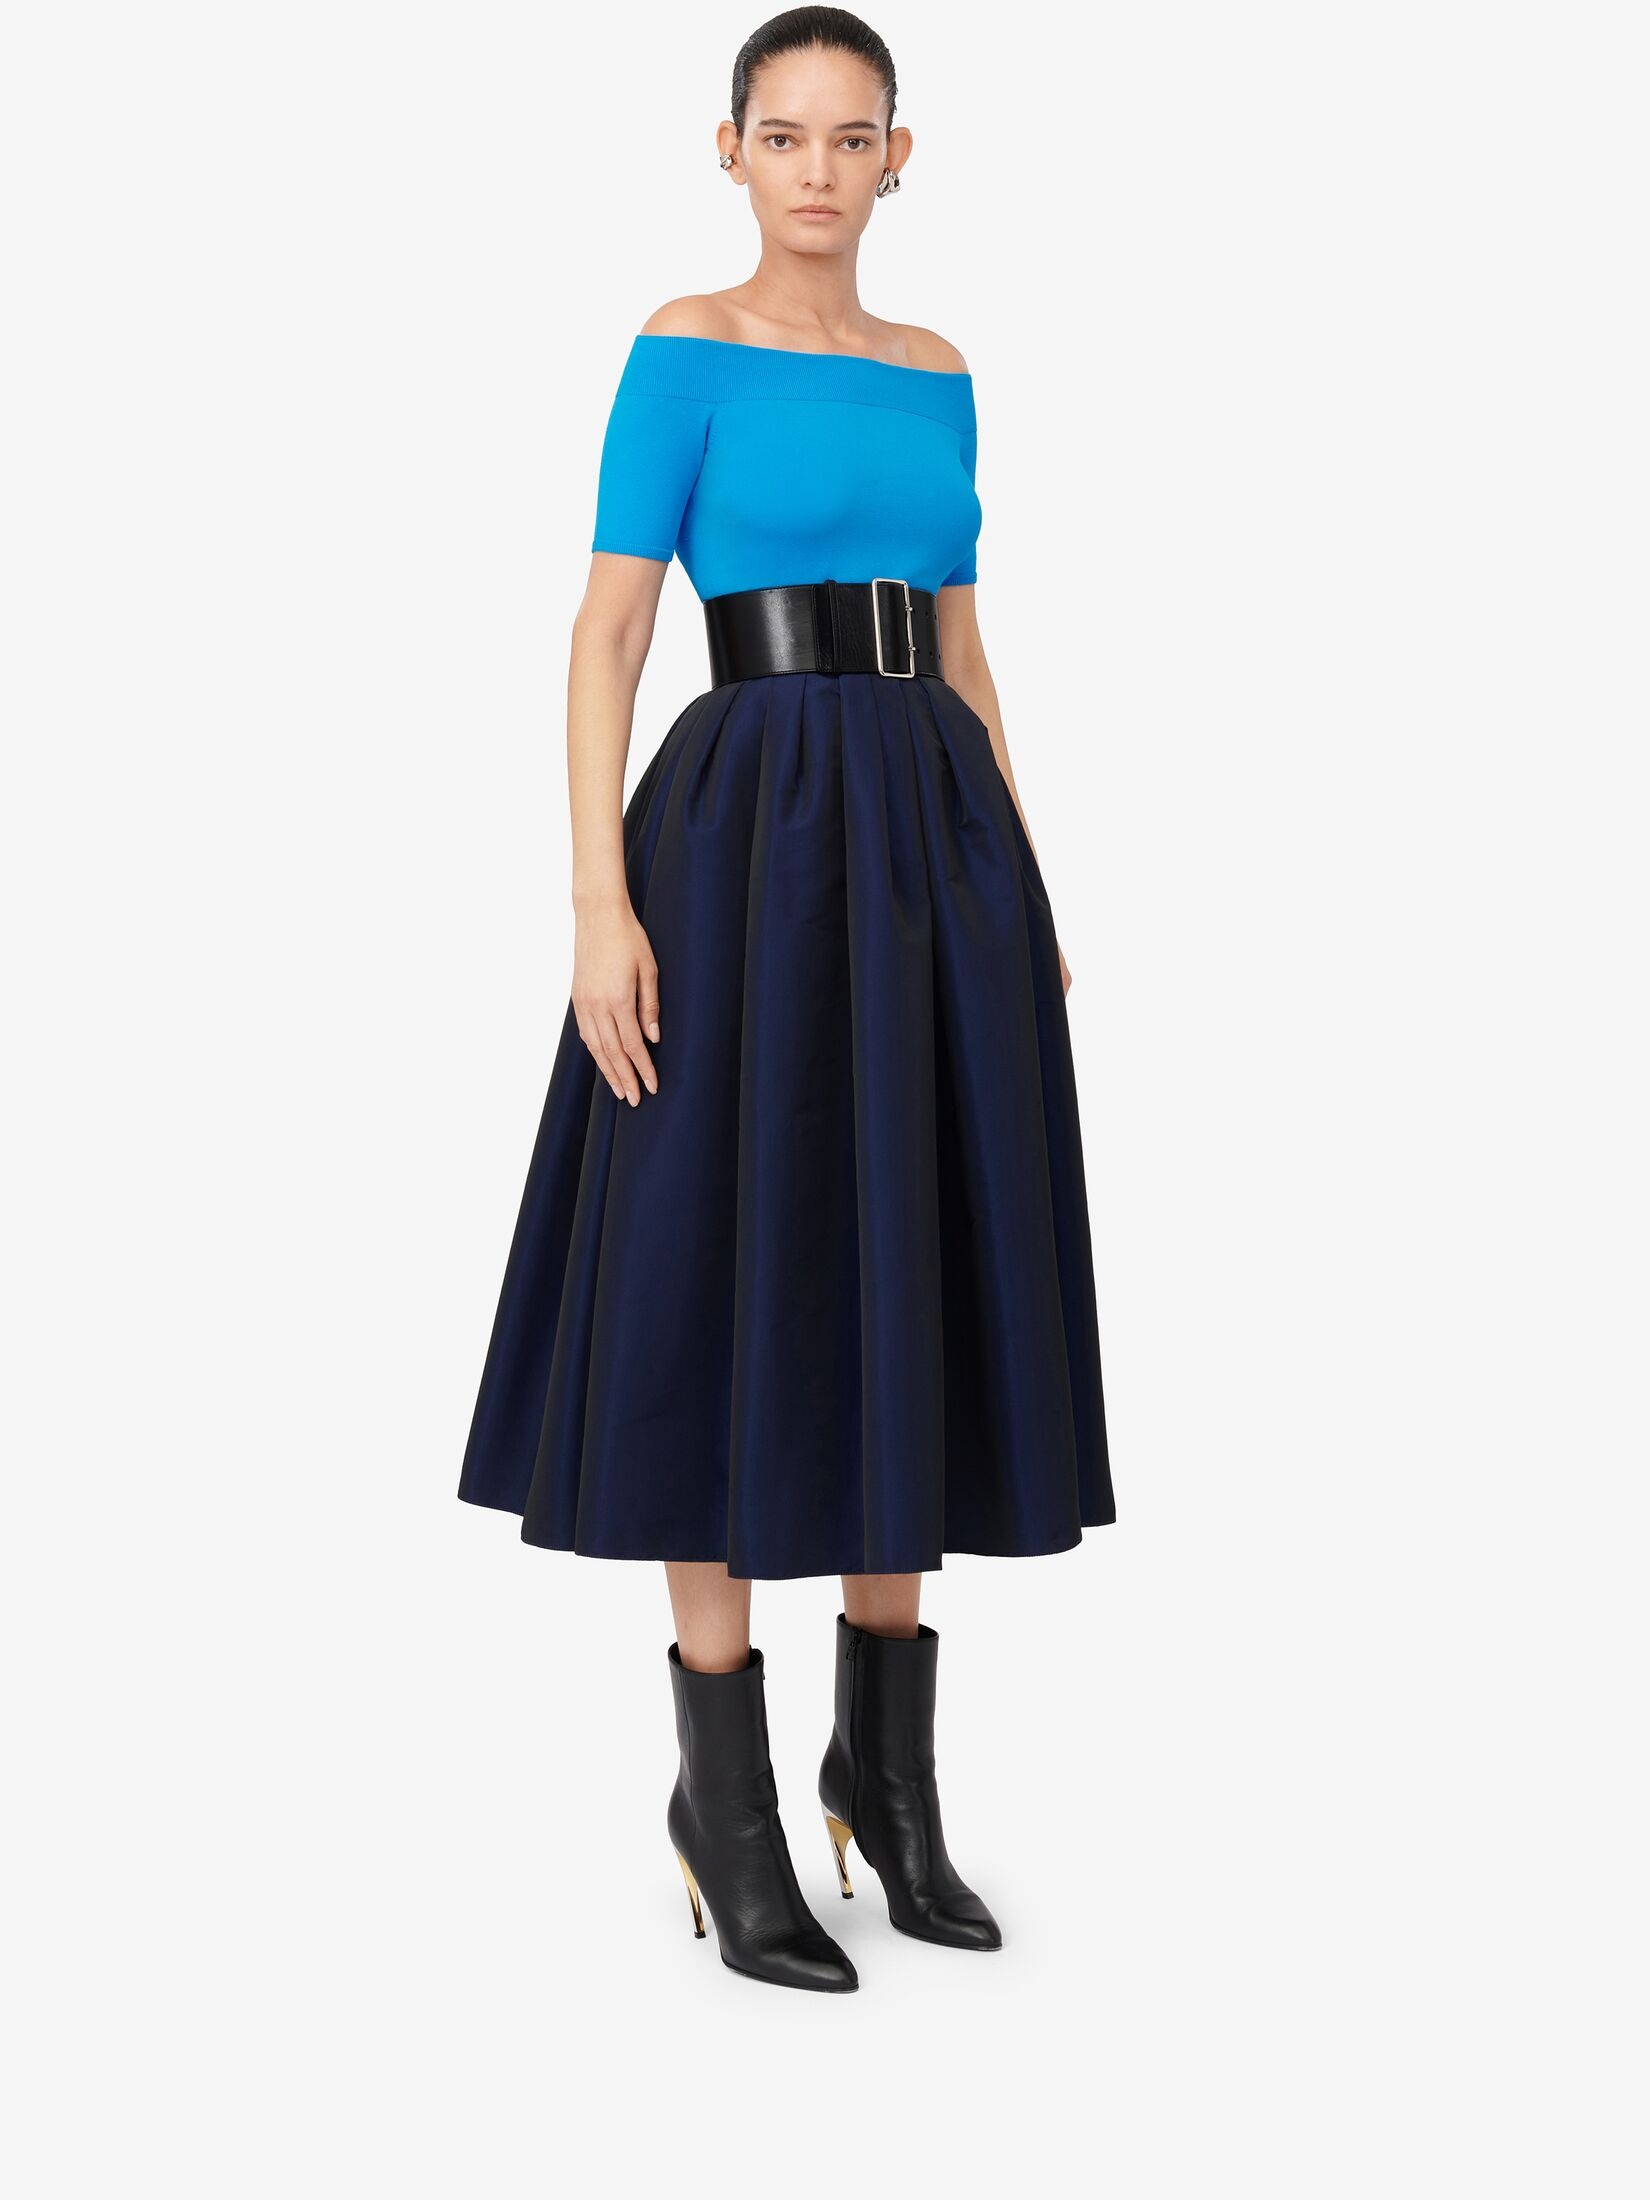 Women's Pleated Midi Skirt in Electric Navy - 3